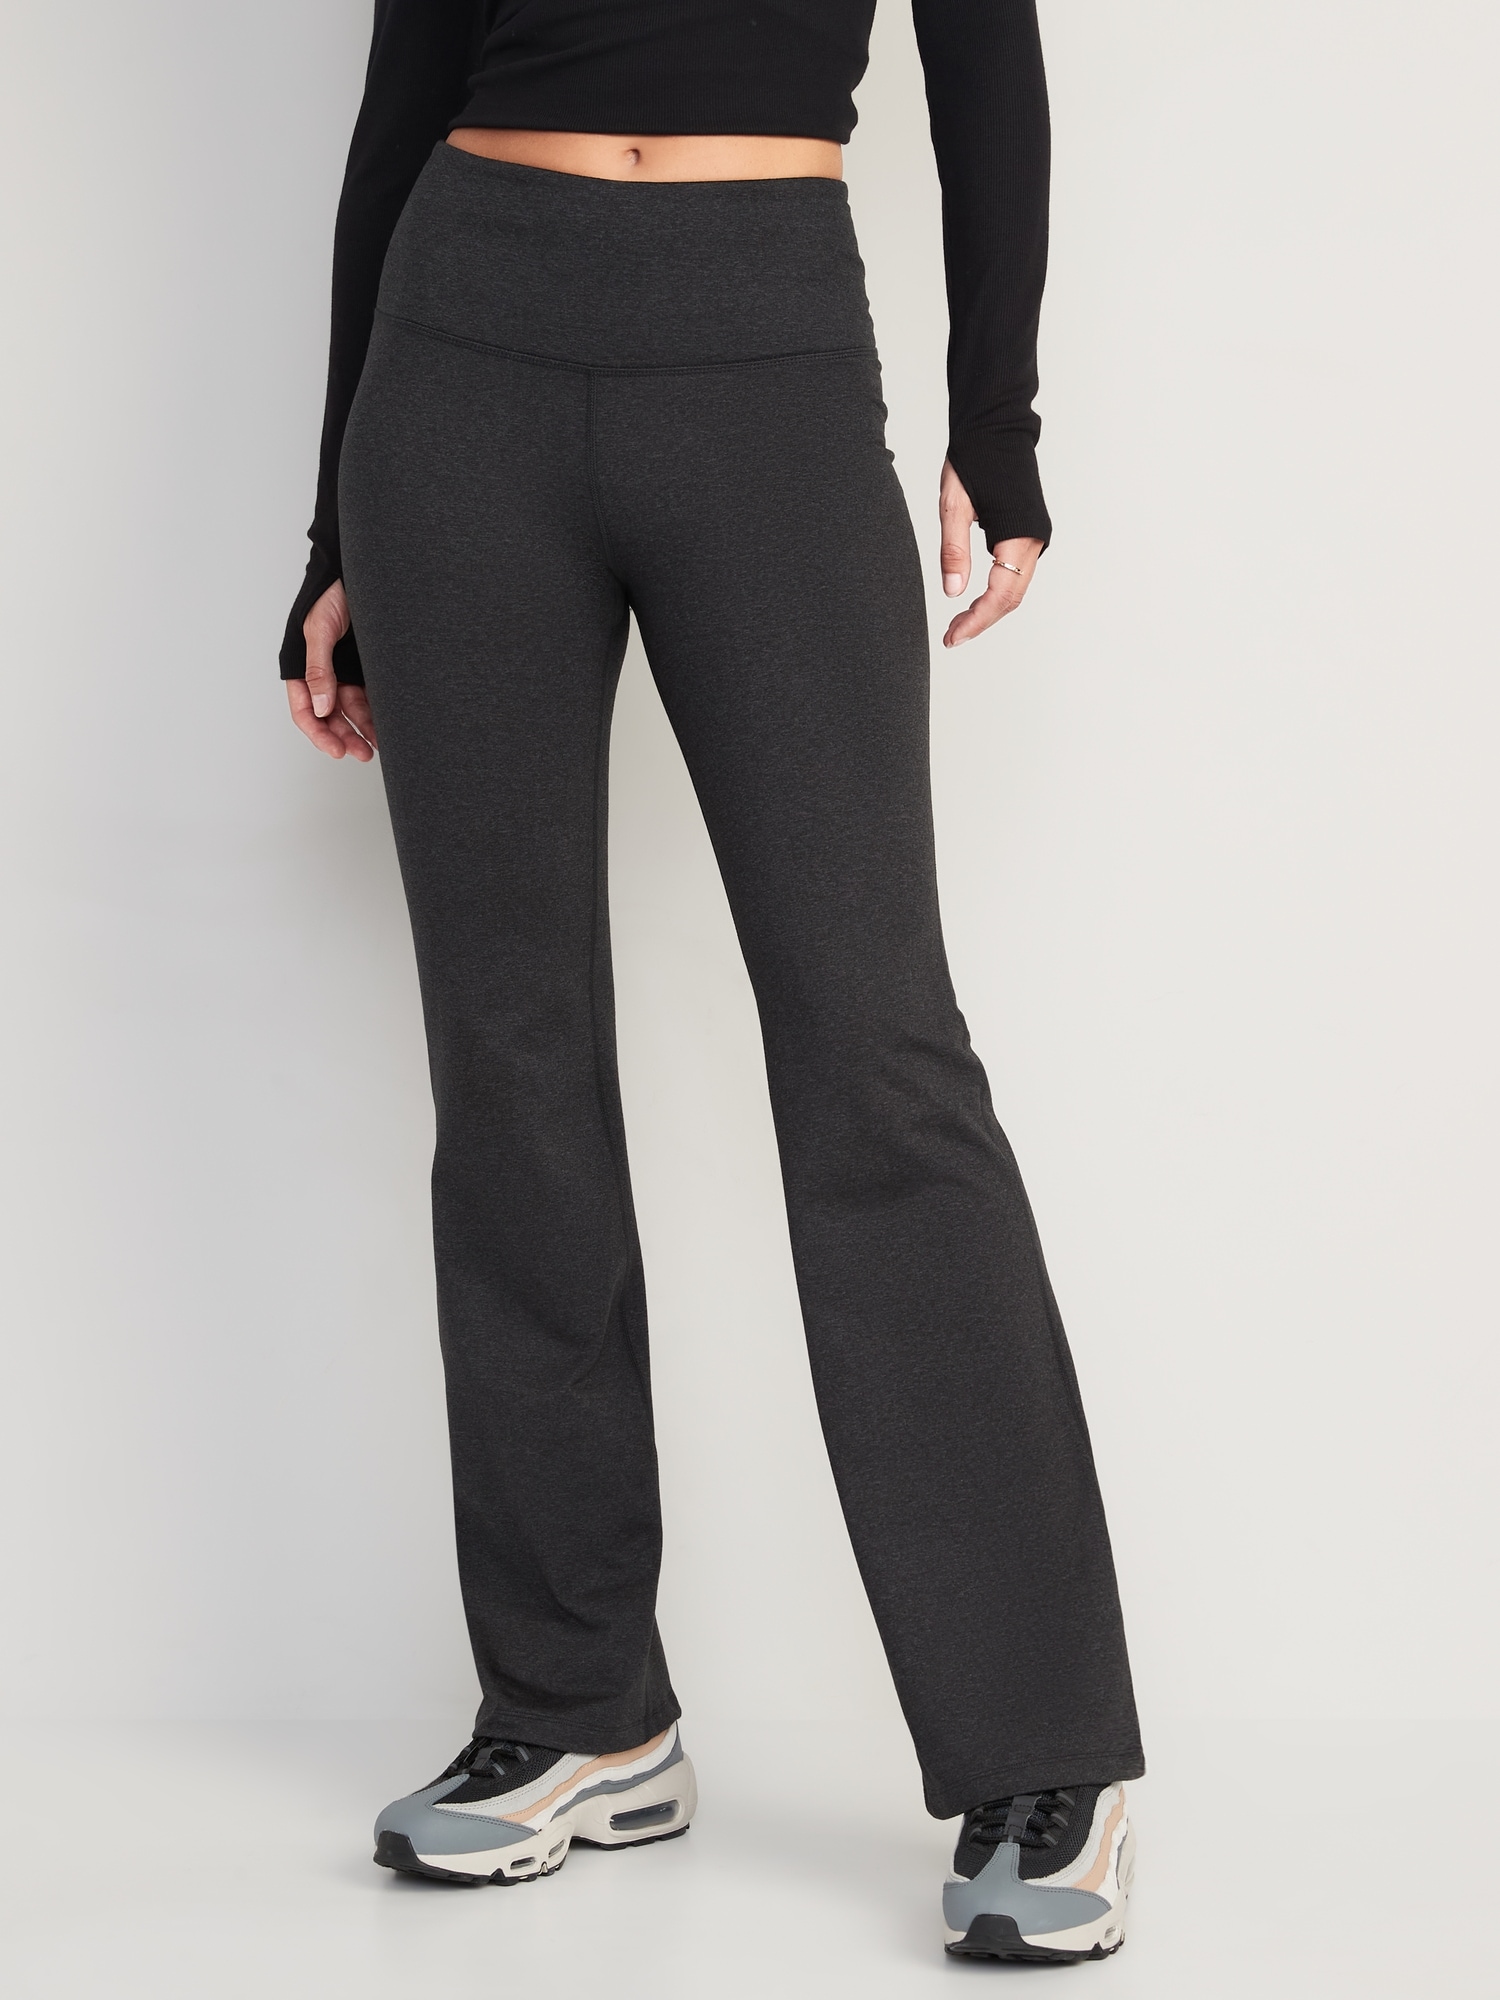 Old Navy Women's High-Waisted CozeCore Leggings only $15 (Reg. $45